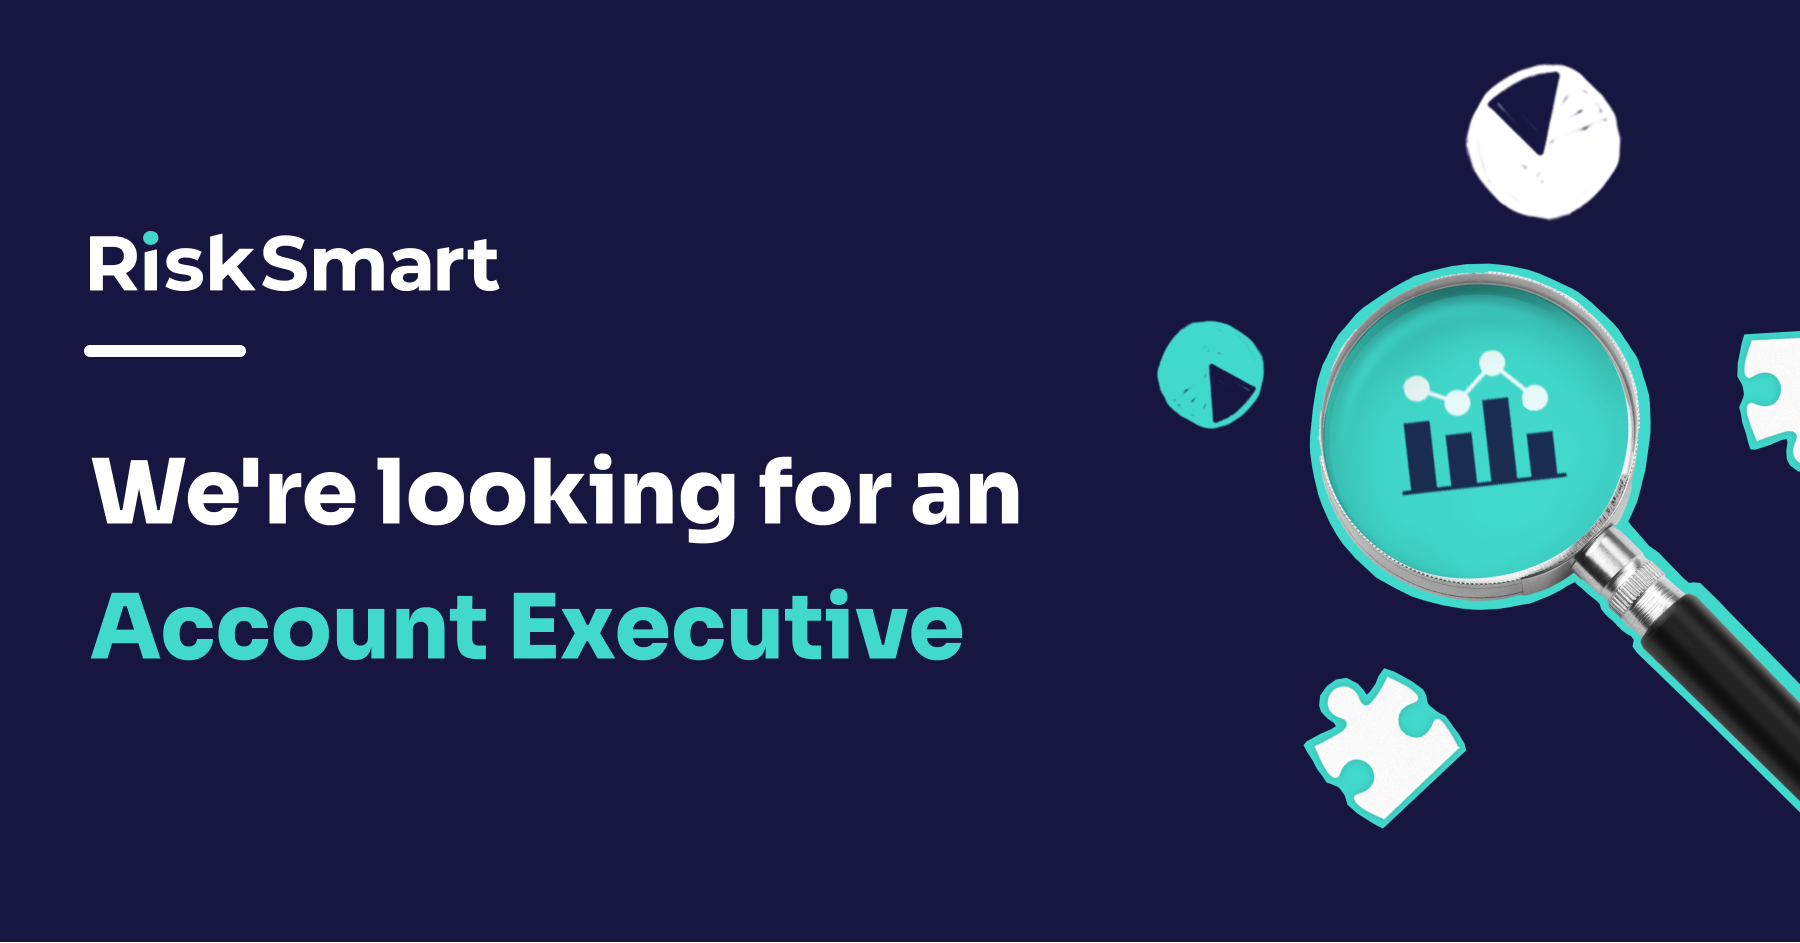 Featured image with the RiskSmart logo and the text &#34;We&#39;re looking for an Account Executive&#34;.